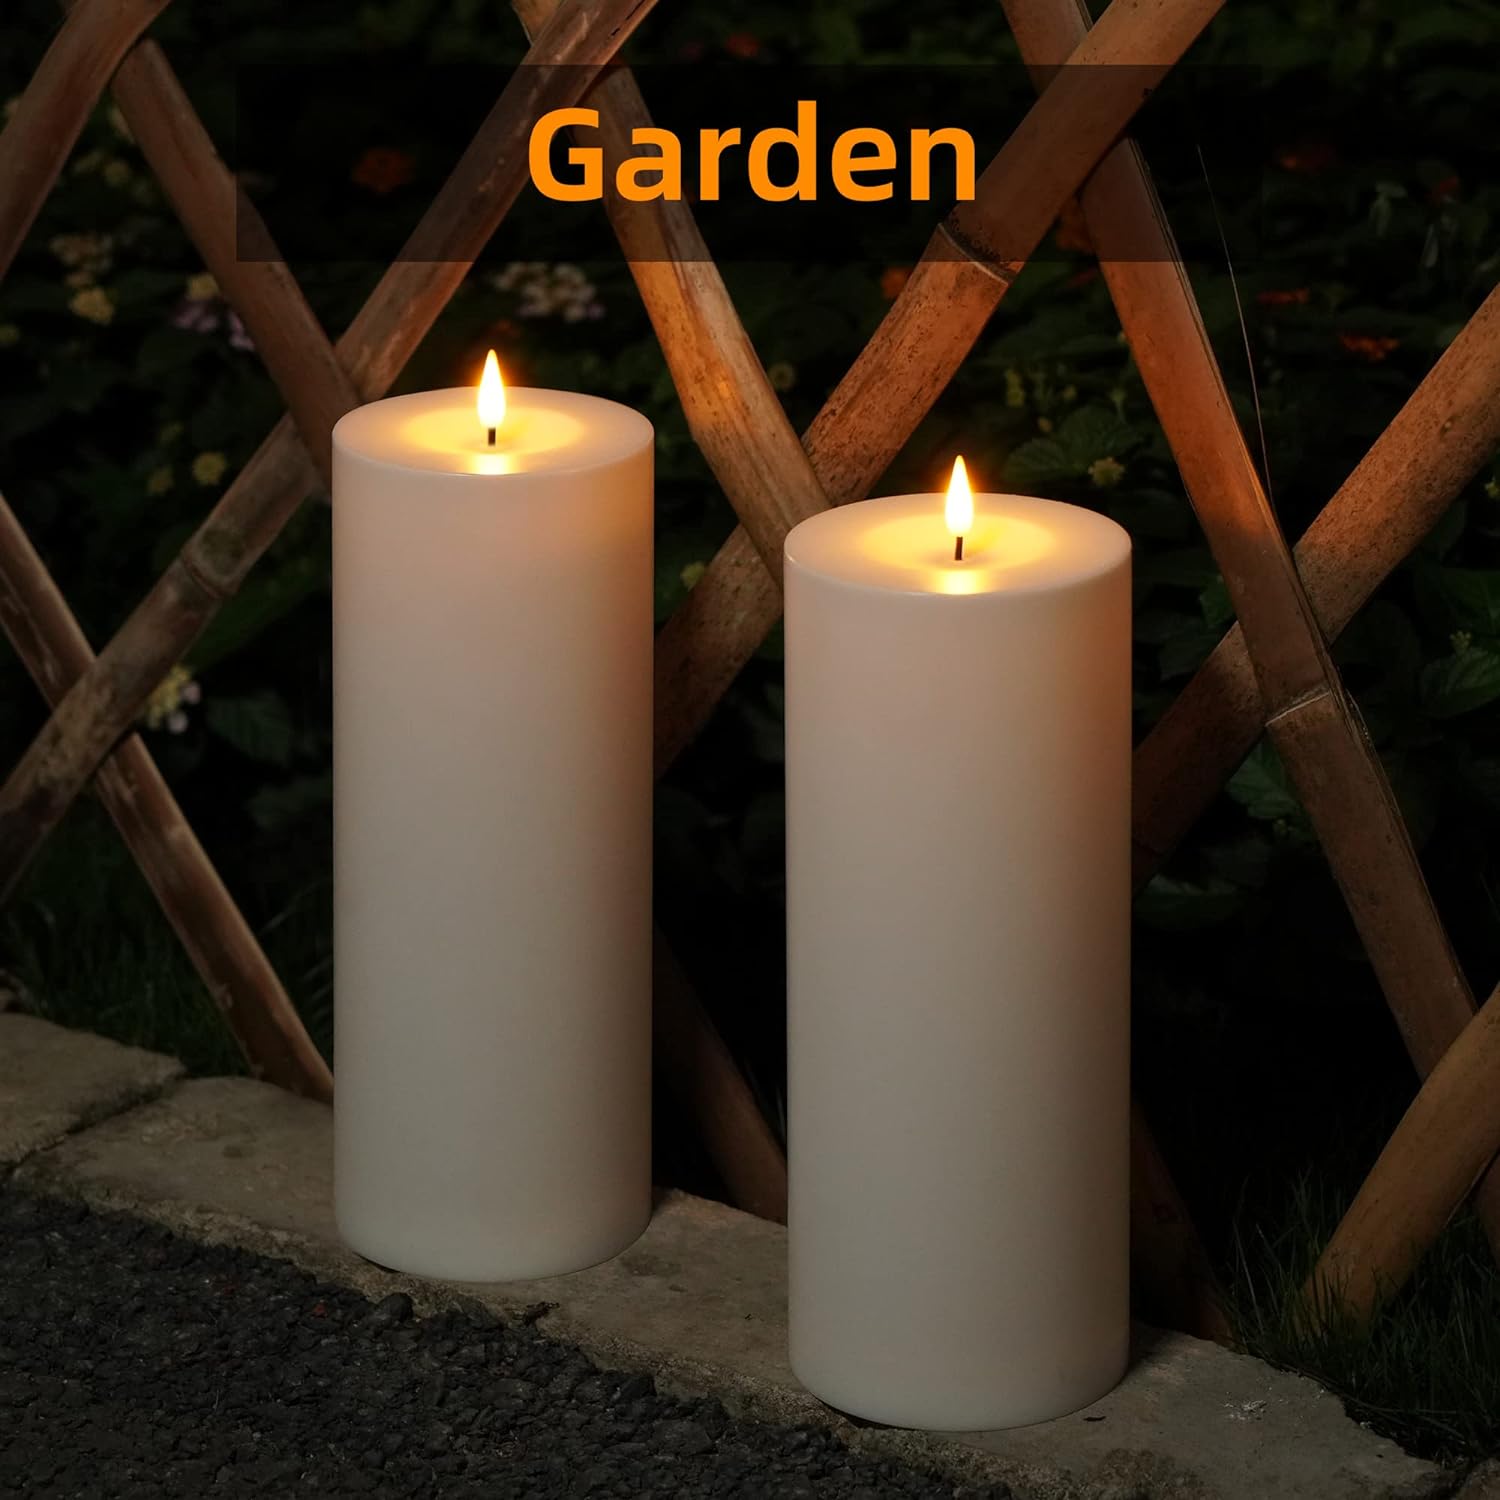 Patiphan Large Flameless Candles Outdoor, 11" x 4" Battery Operated Candles with Remote and Timers, Flickering Flame LED Candles, Waterproof Tall Pillar Candles for Decoration, White Set of 2